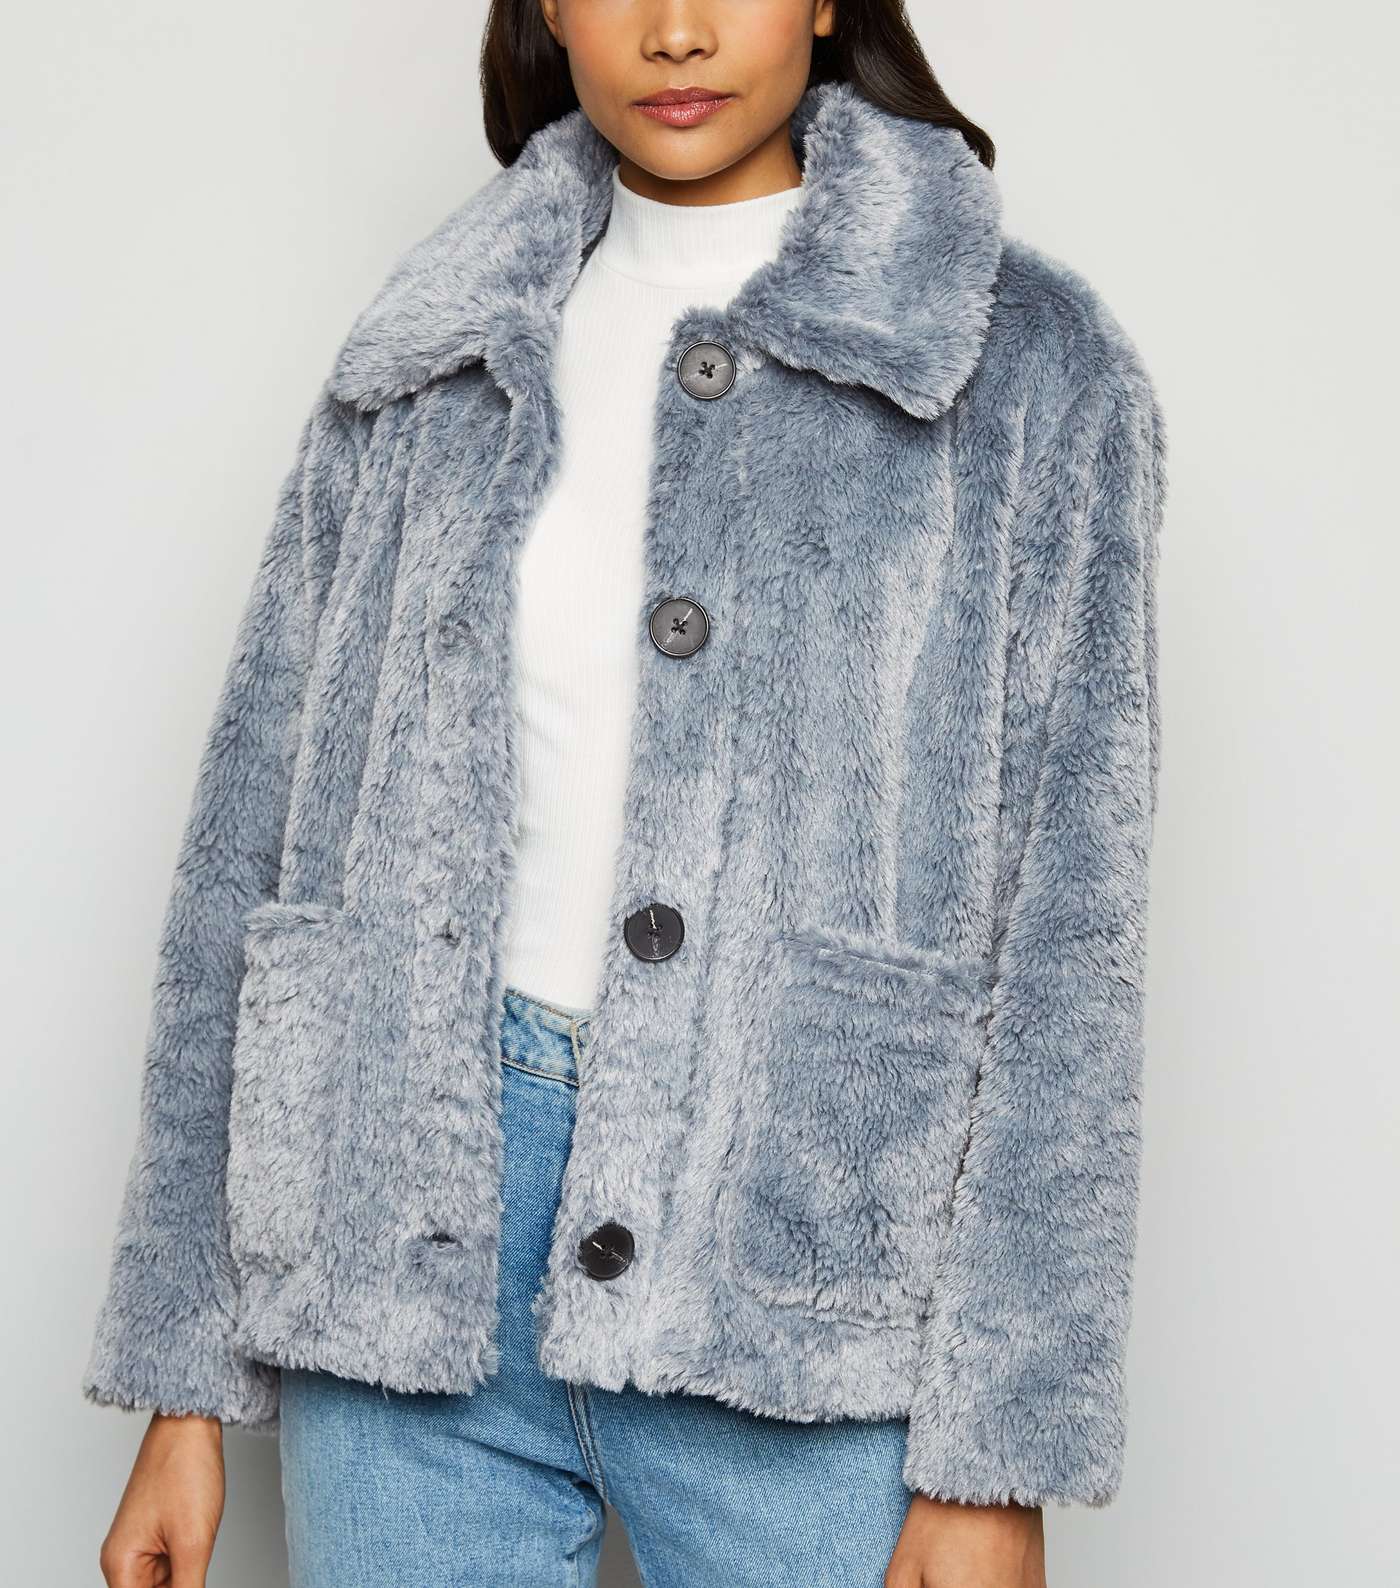 Urban Bliss Pale Blue Teddy Collared Jacket